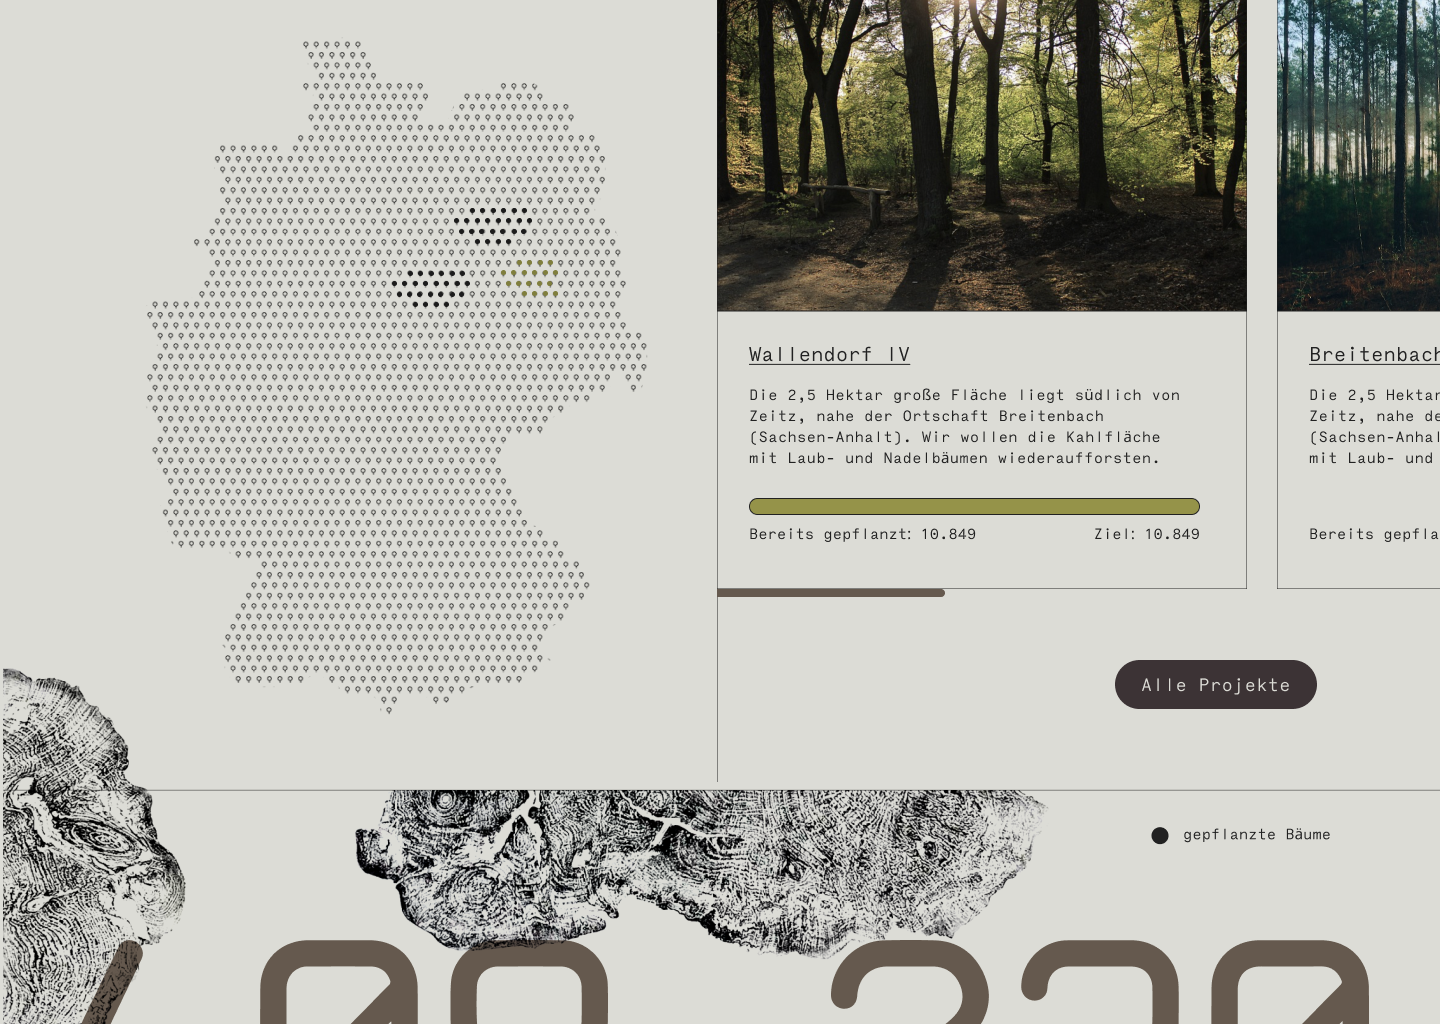 A clean webdesign in light grey and black of an interactive map. The map is the shape of germany based on minimalistic tree icons. On the right side projects are selectable by cards. They are illustrated with warm forest pictures. On the bottom are huge black prints of tree slices.